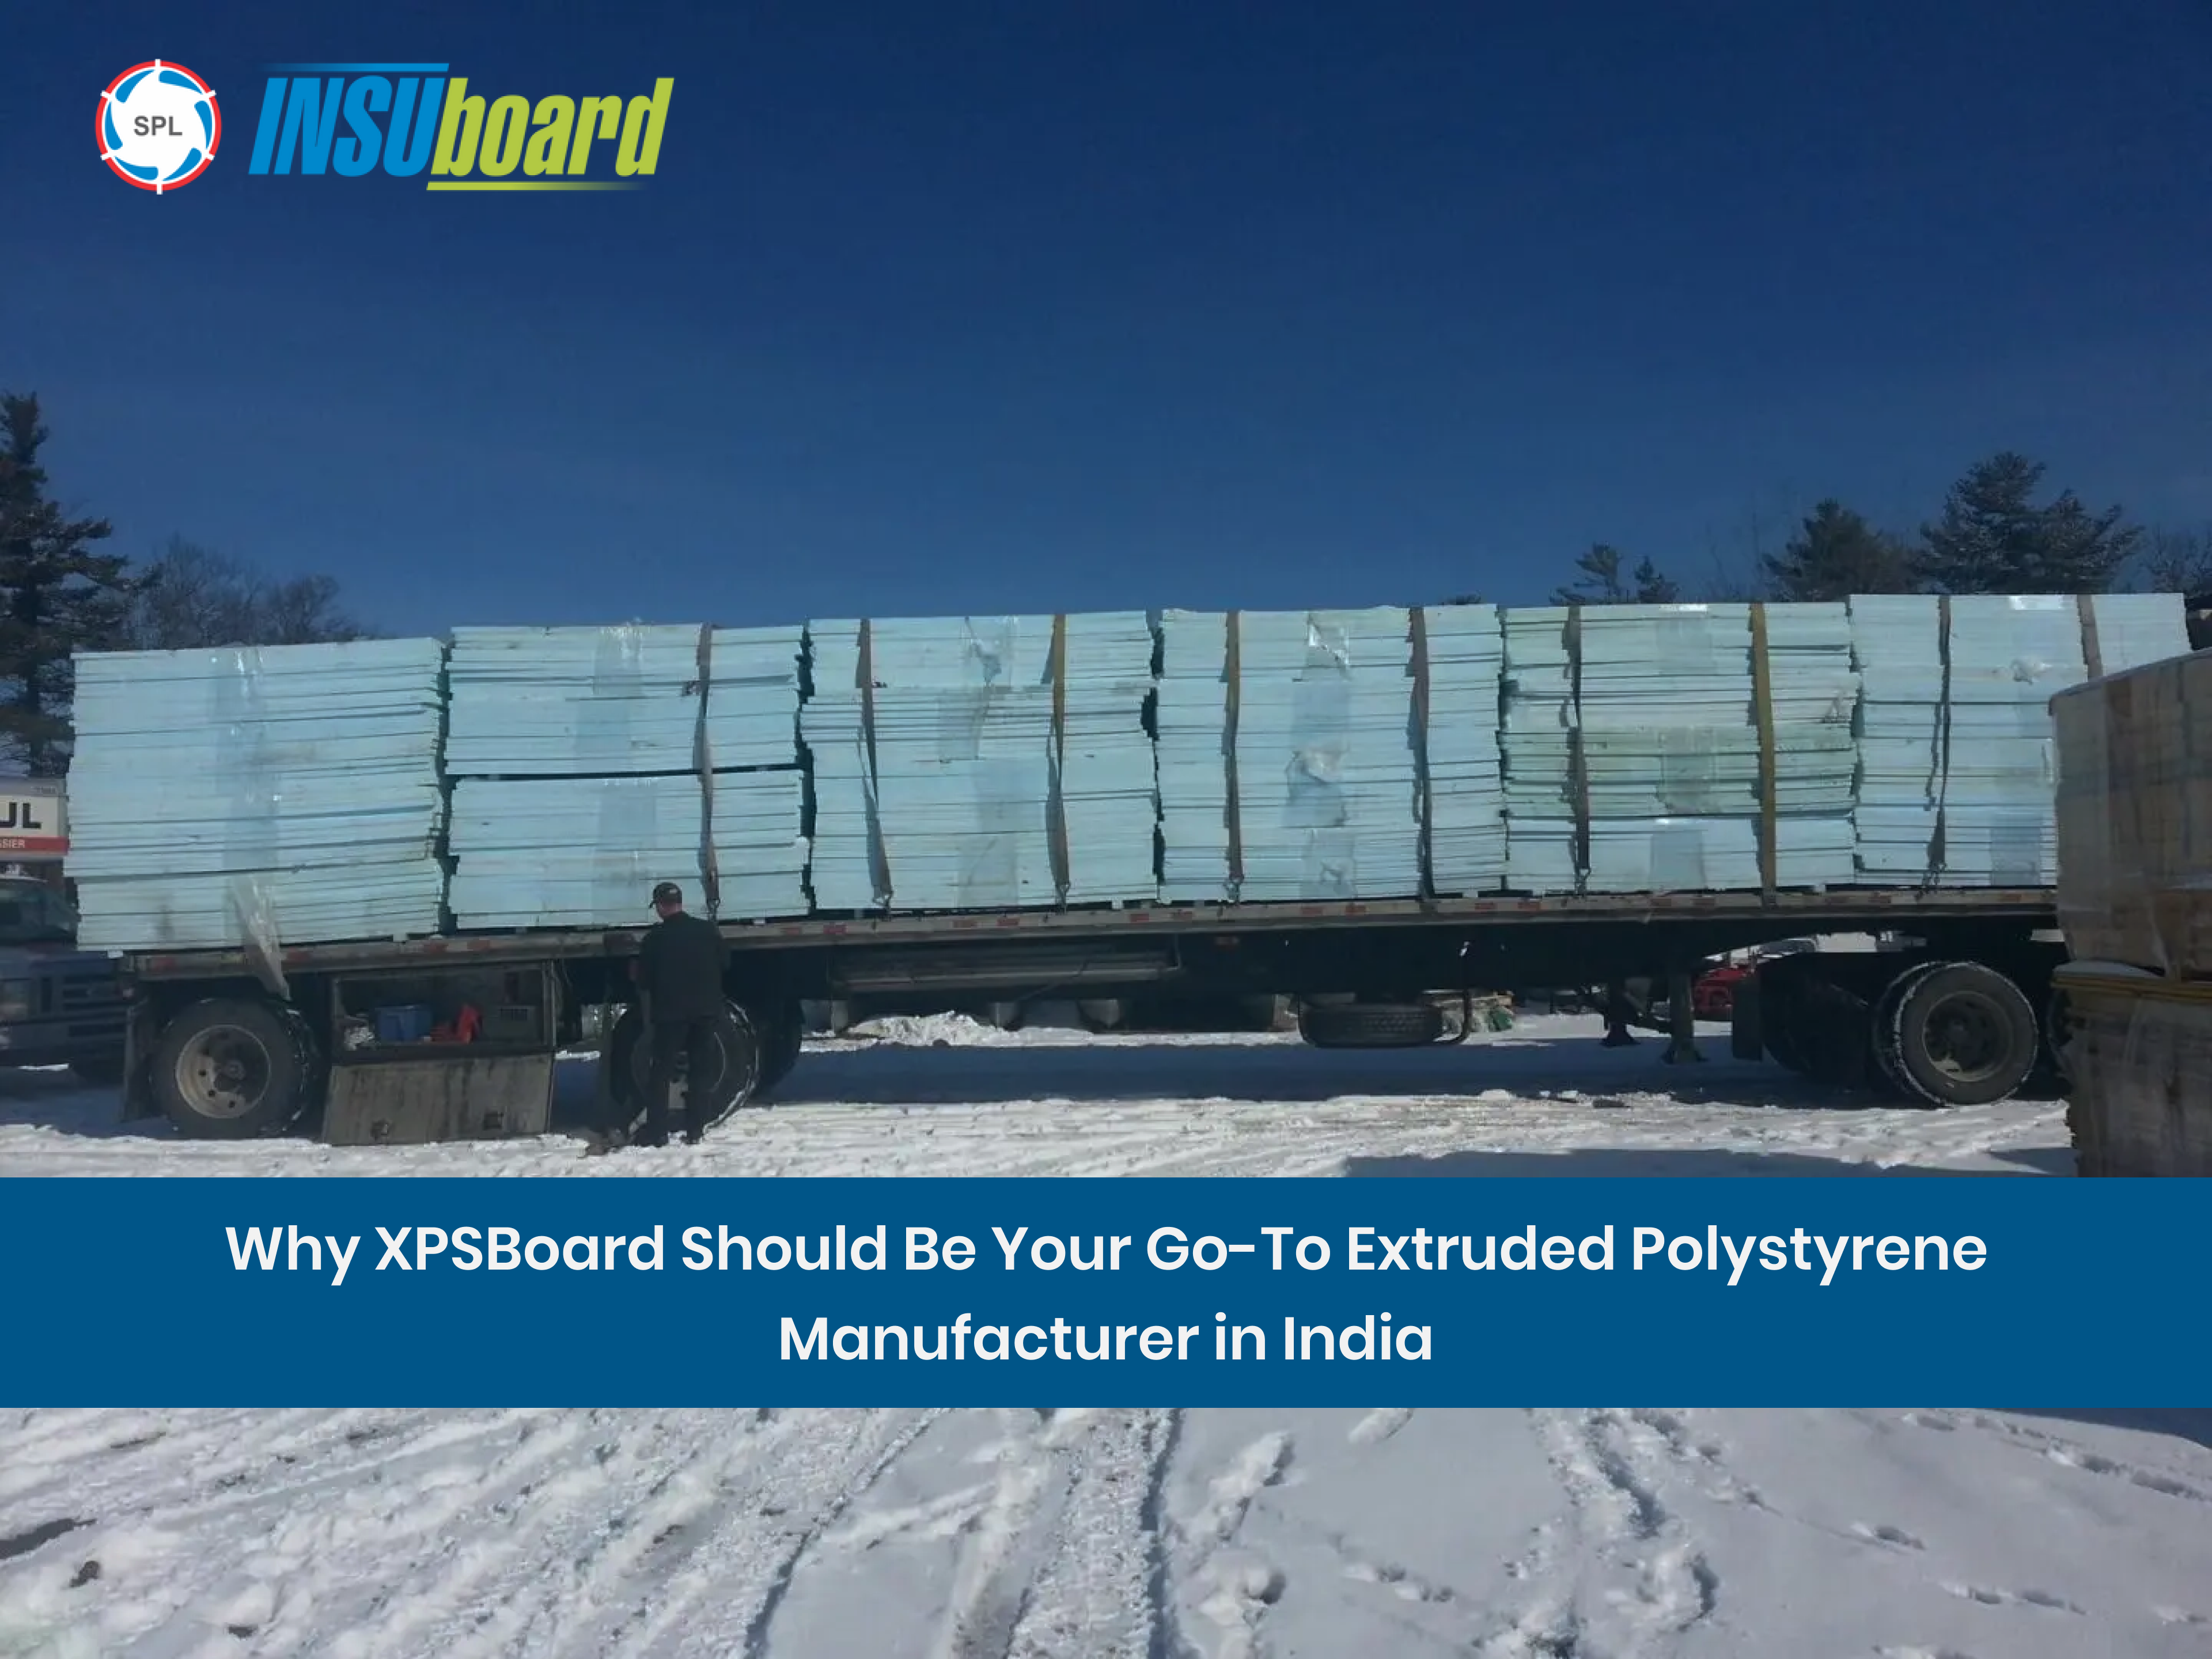 Why XPSBoard Should Be Your Go-To Extruded Polystyrene Manufacturer in India